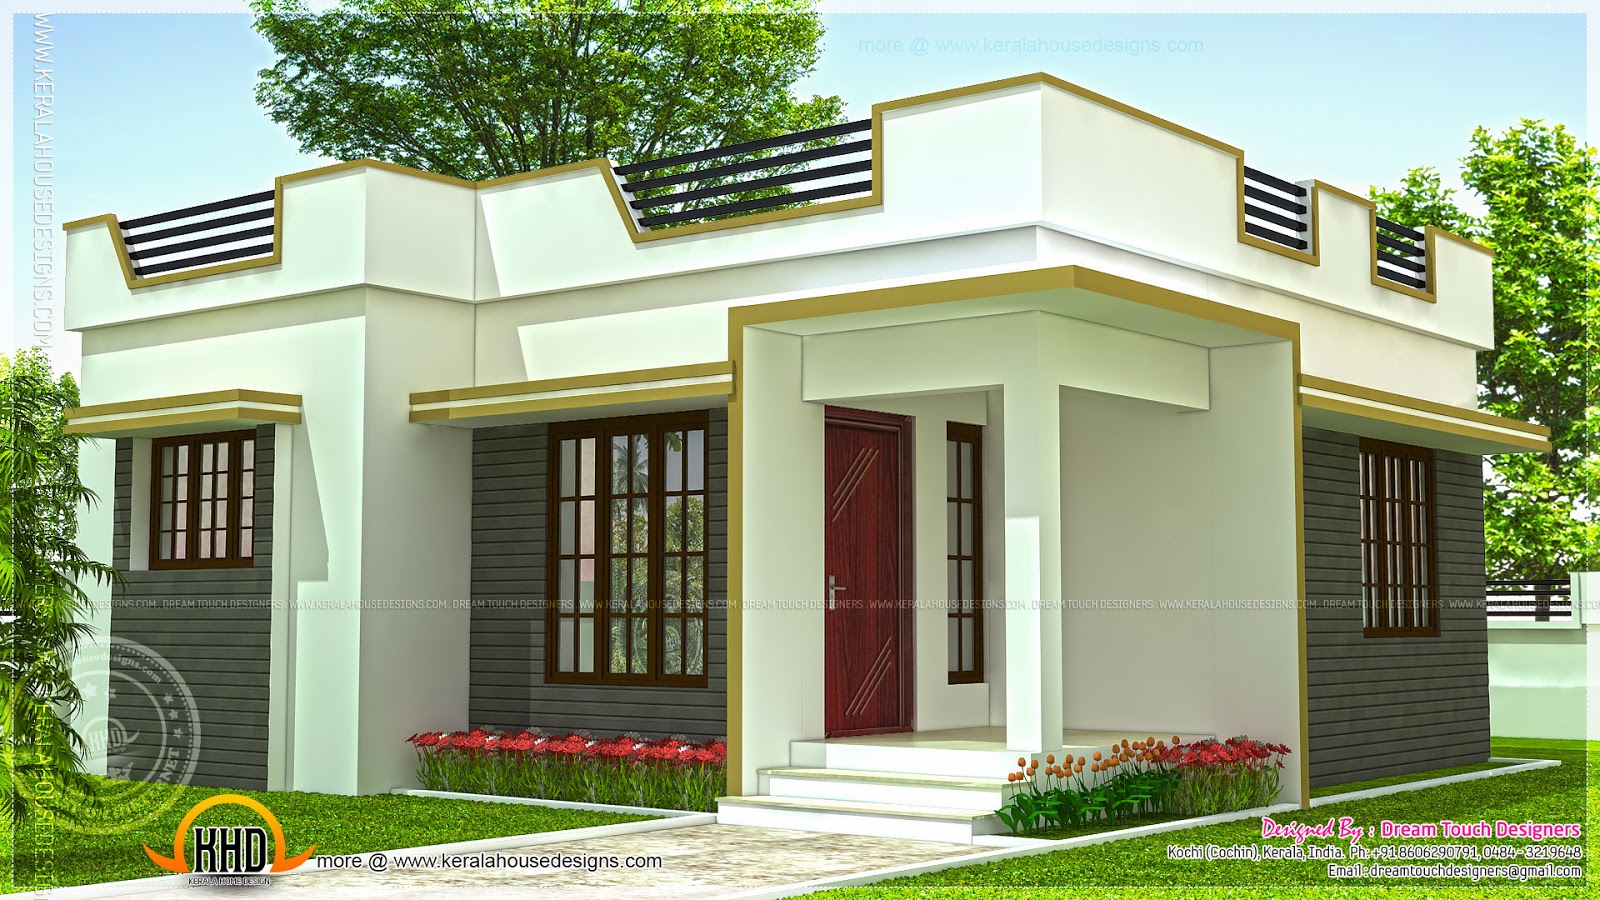  Small  house  in Kerala  in 640 square feet Home  Kerala  Plans 